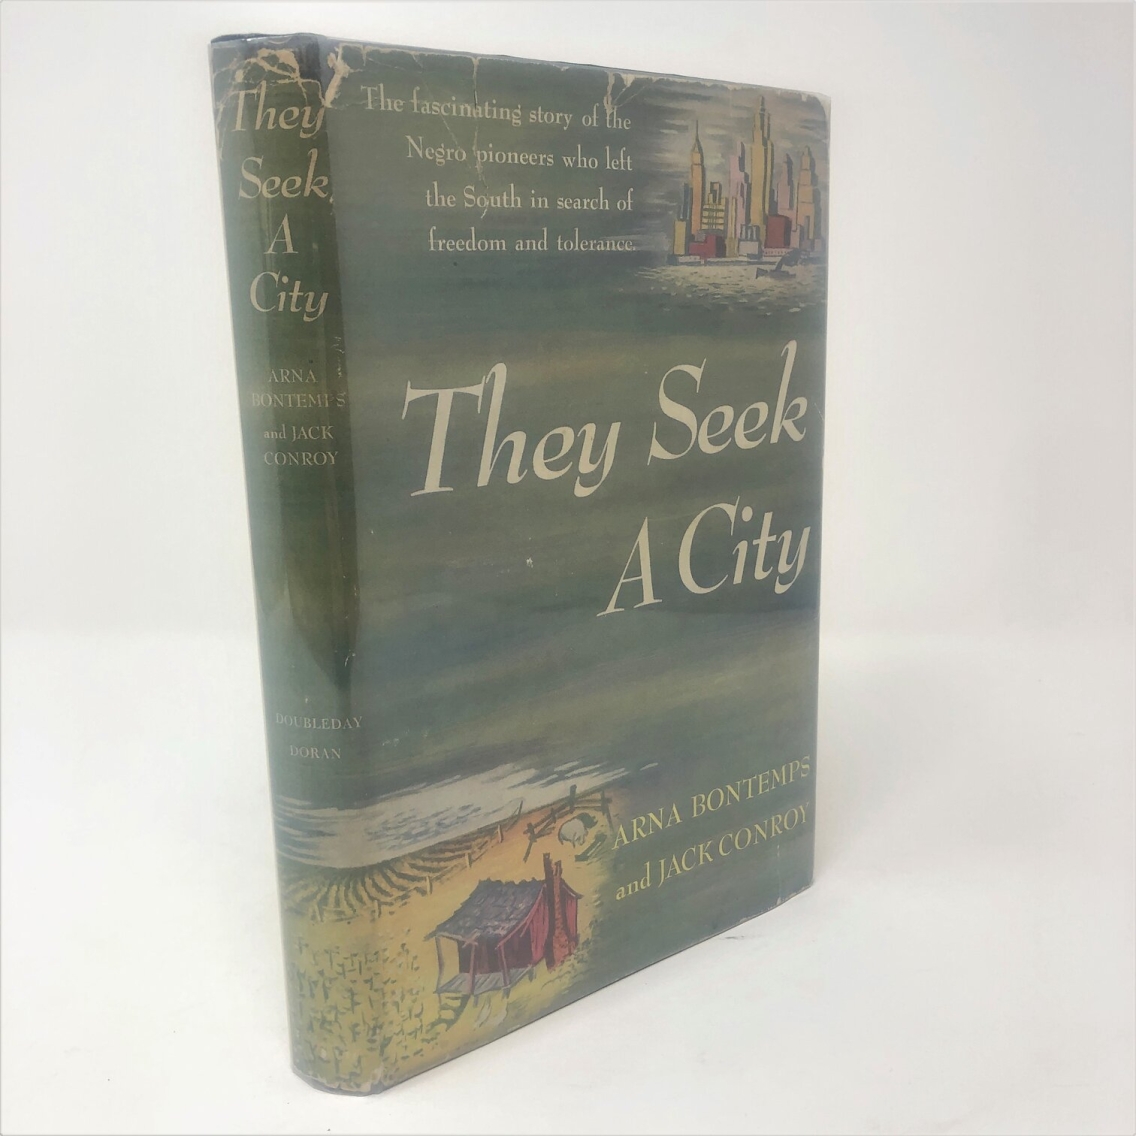 Photograph of They Seek a City by Arna Bontemps and Jack Conroy. 